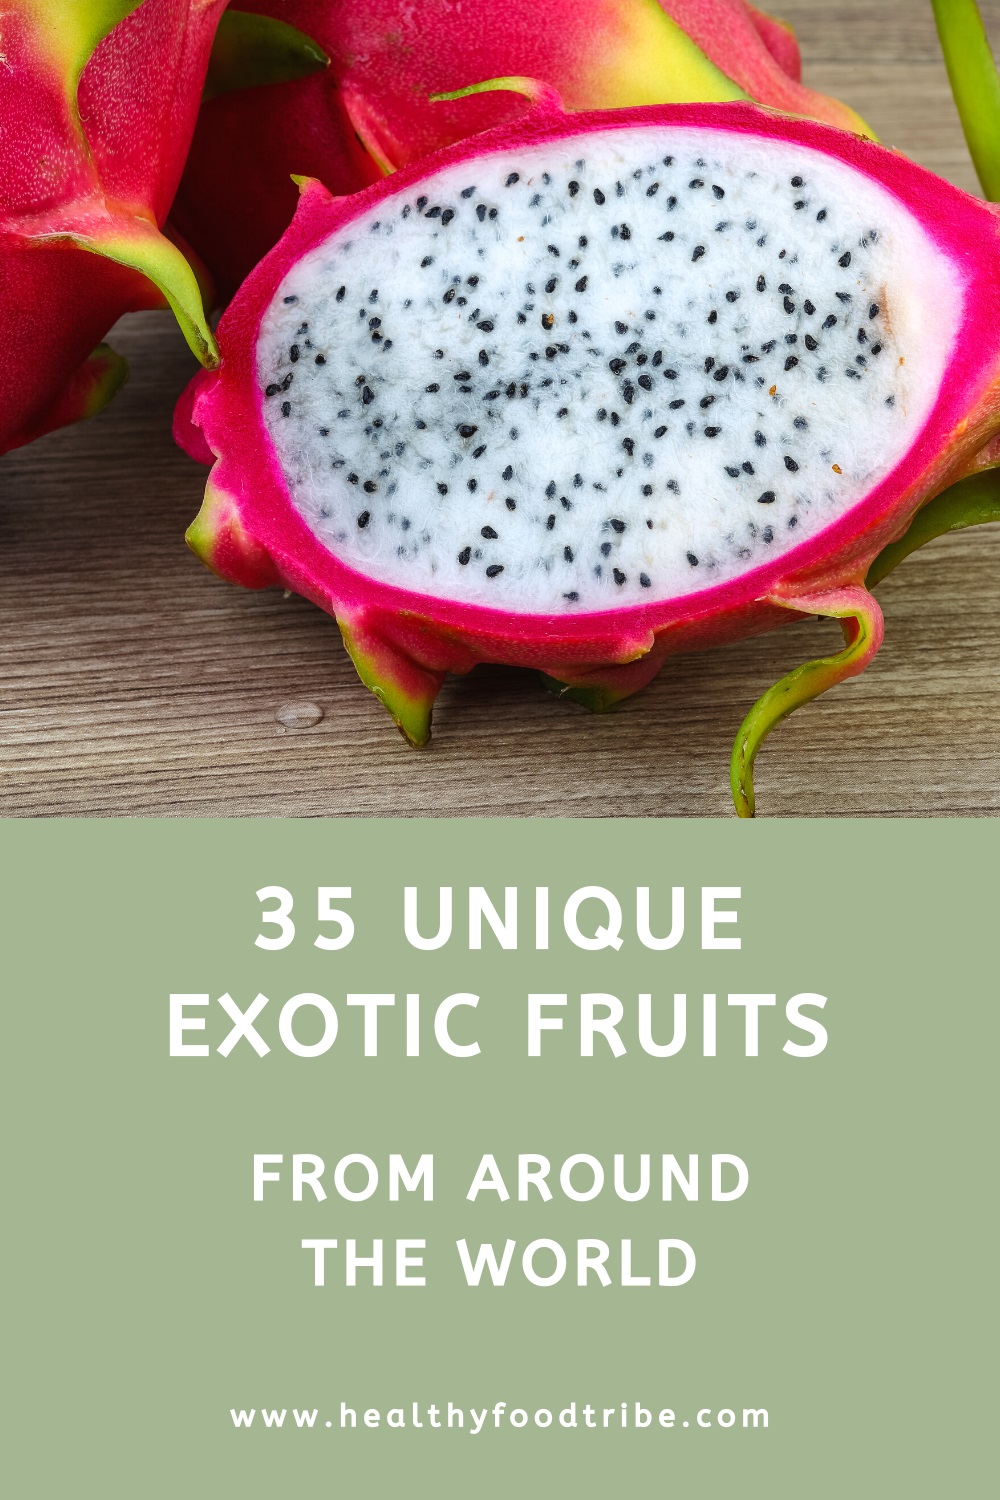 35 Unique exotic fruits from around the world